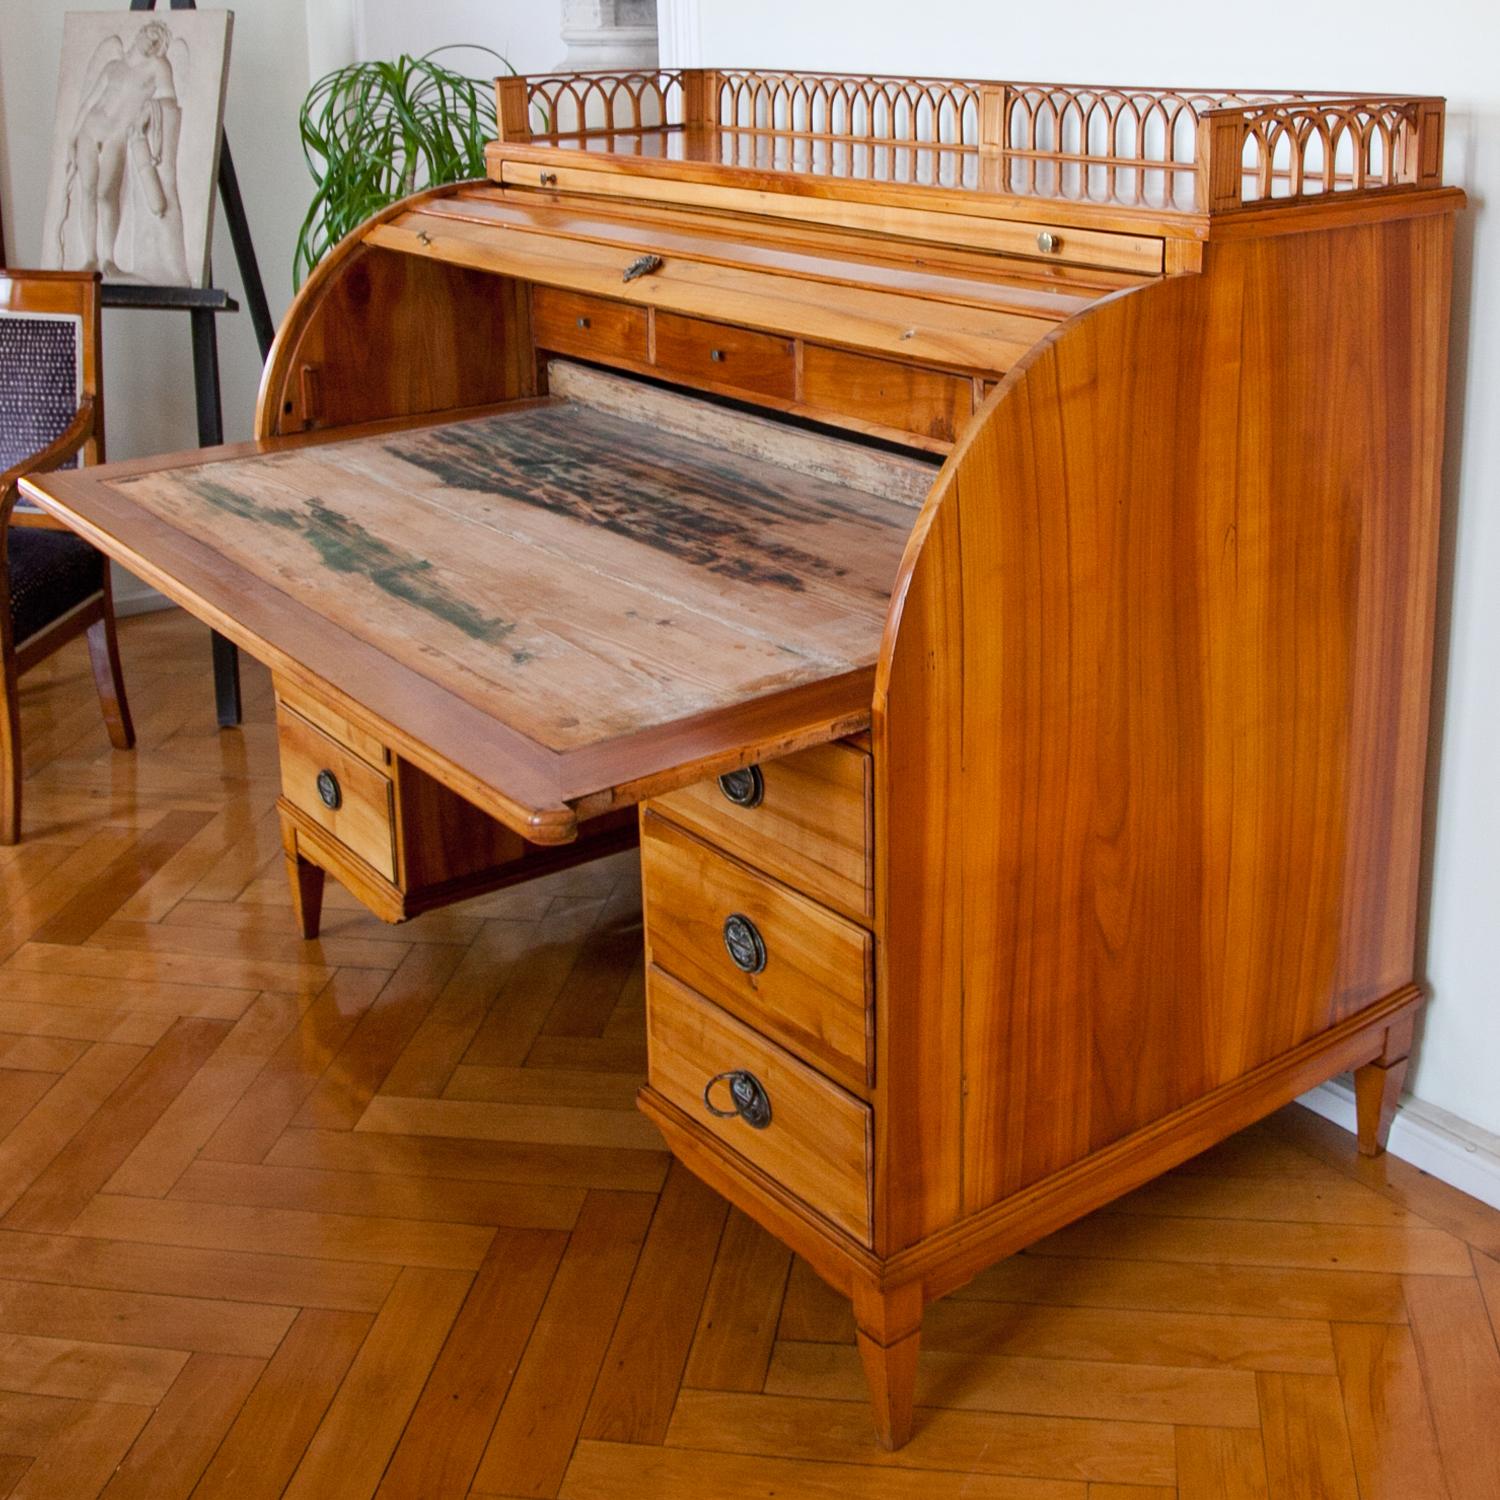 Large roll-top desk out of solid cherry wood. The base with seven drawers stands on tapered legs. The top has one very slim pullout and a low arcade balustrade on three sides. The interior is made up out of four drawers. The desk is in its original